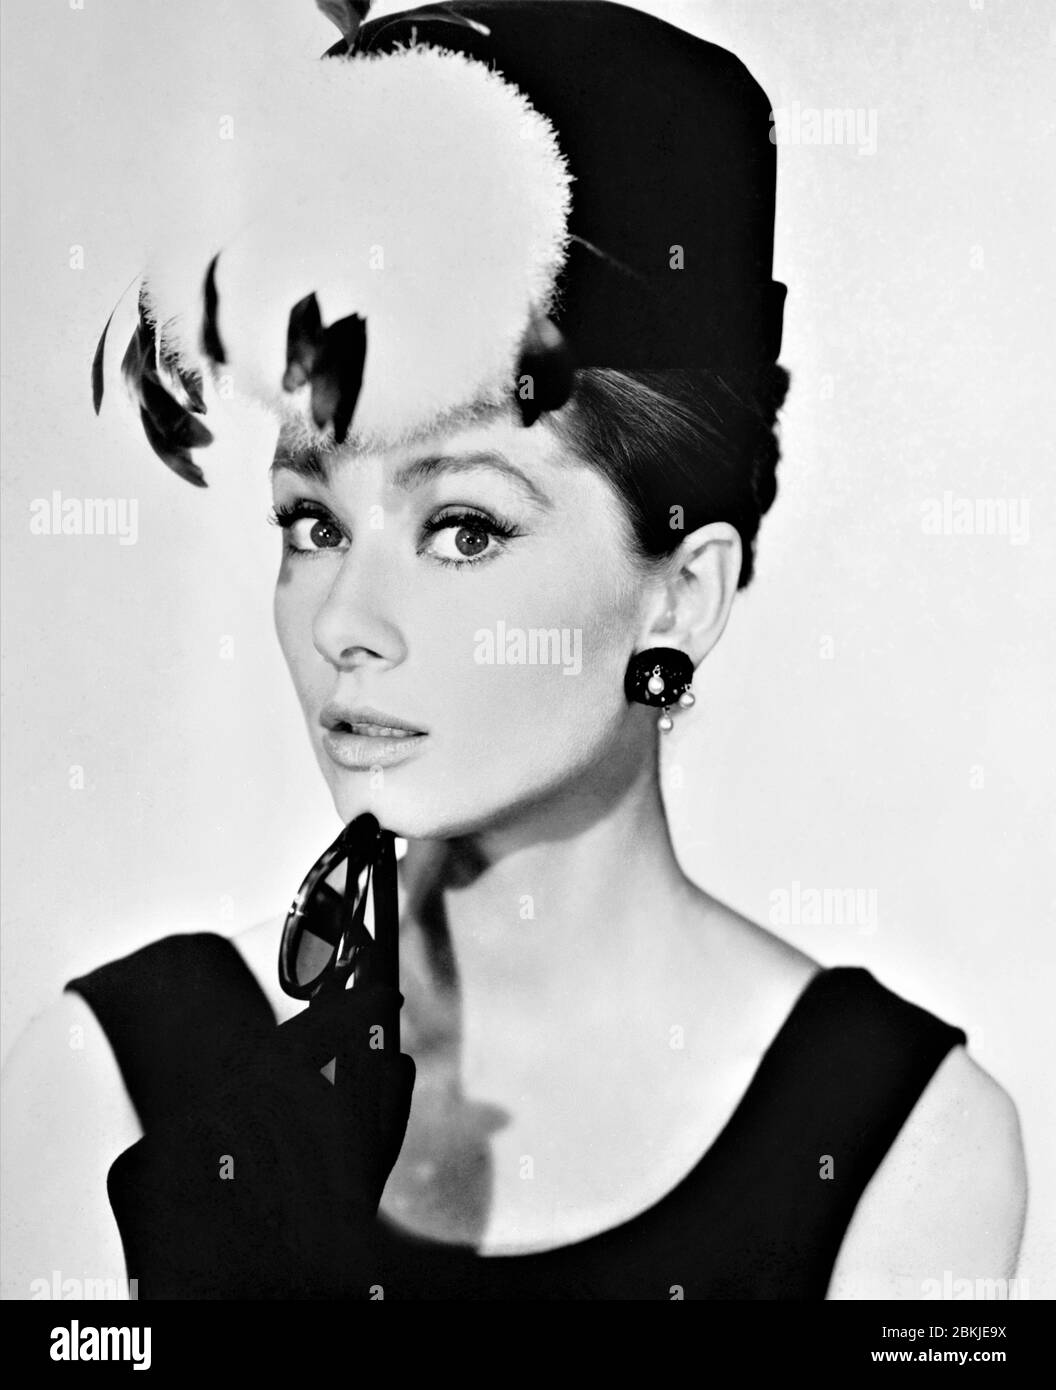 Audrey Hepburn As Holly Golightly Portrait By Bud Fraker For Breakfast At Tiffany S 1961 Director Blake Edwards Gown Hubert De Givenchy Novel Truman Capote Jurow Shepherd Paramount Pictures Stock Photo Alamy